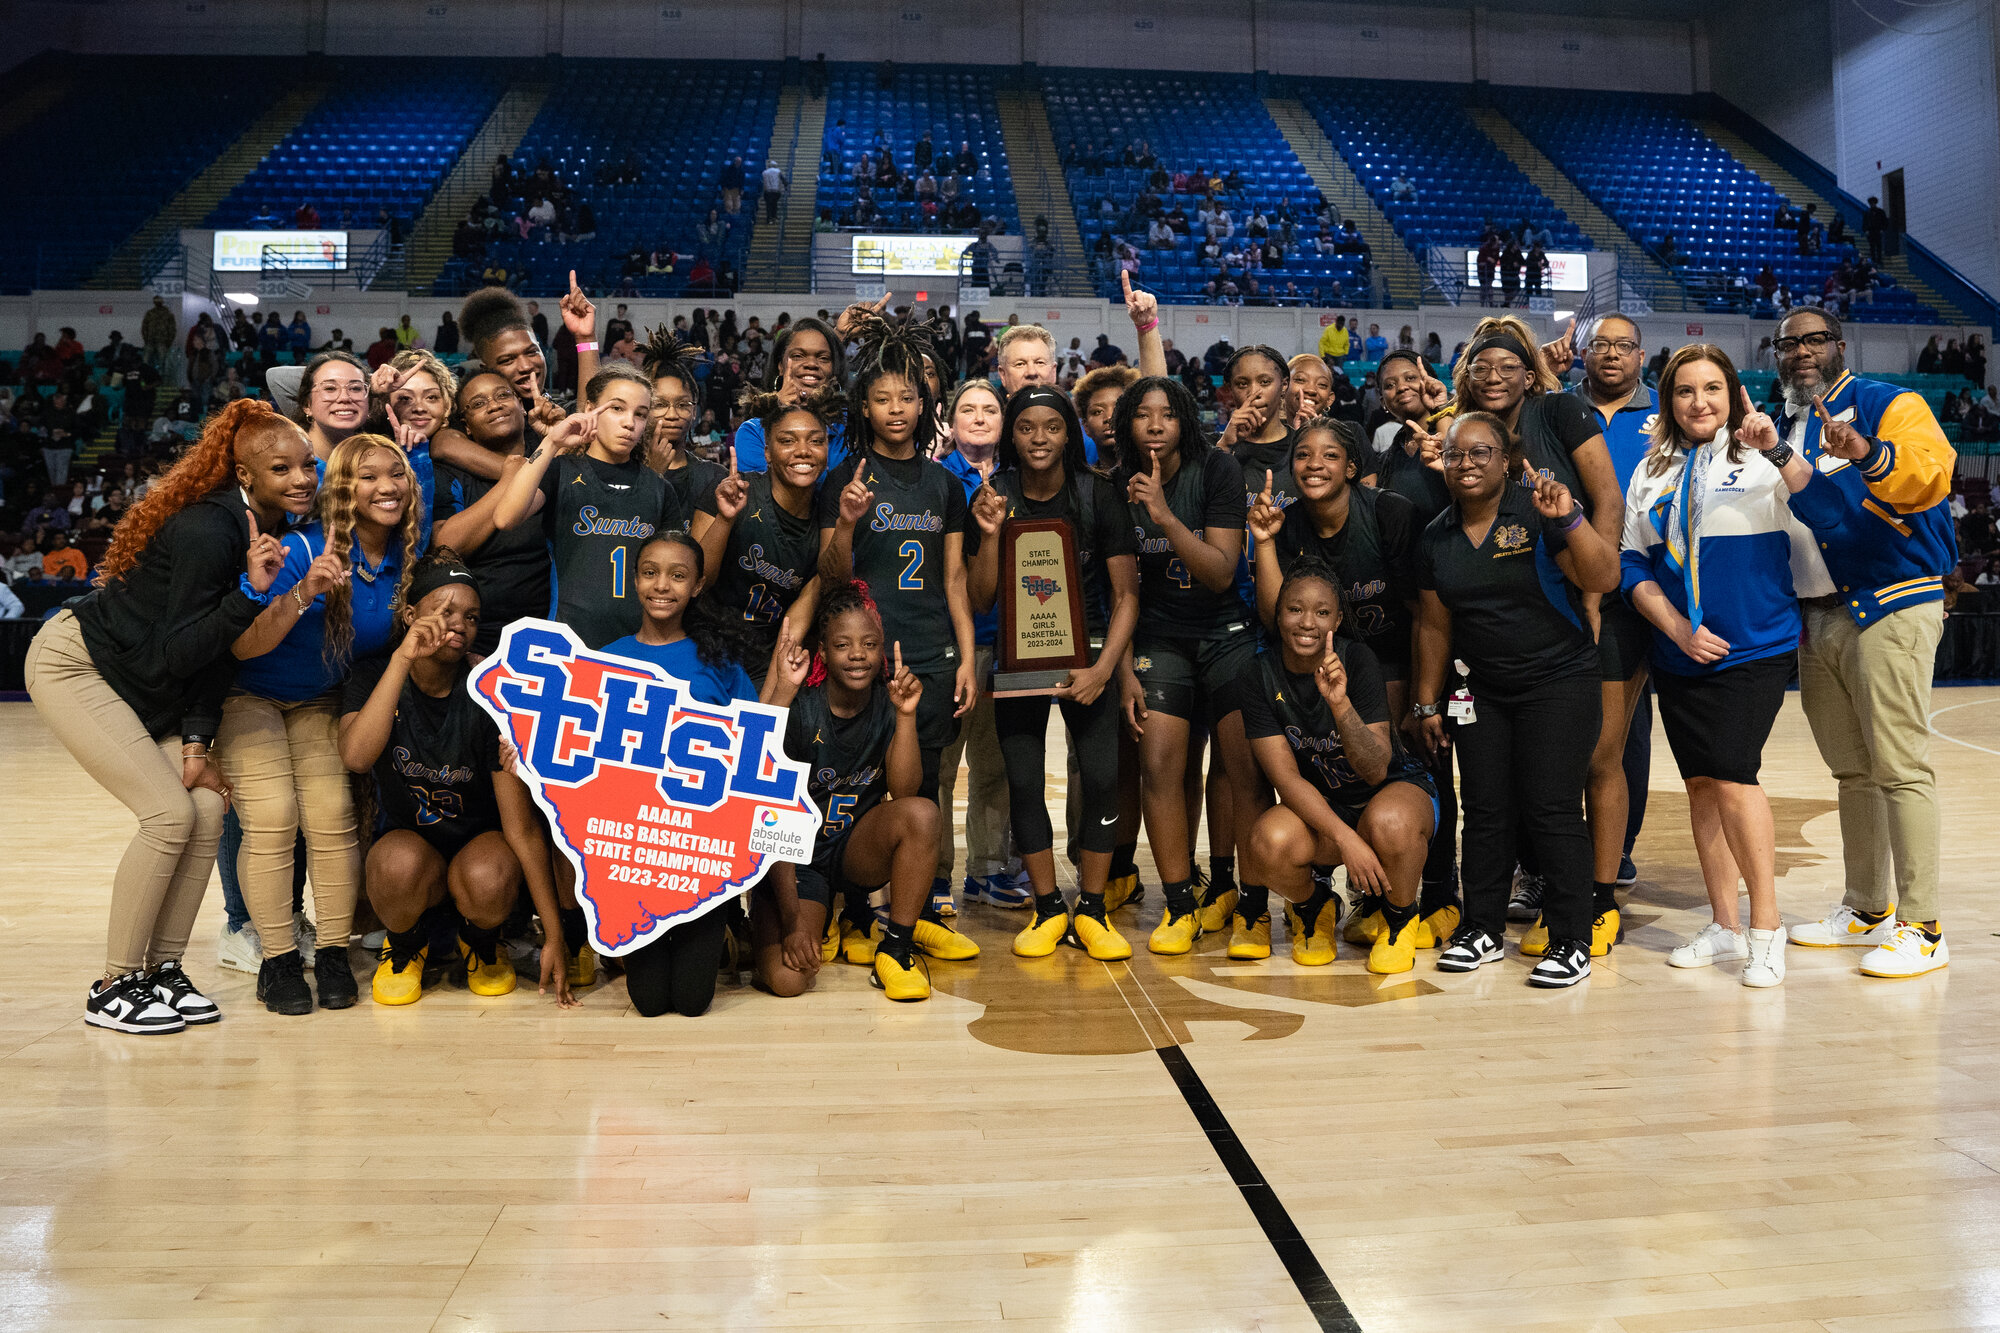 The Sumter High girls basketball team celebrates the SCHSL 5A state championship on Mar. 1 at the Florence Center. For the next two years SCHSL 5A will name two state champions in every sport, splitting the classification between larger and smaller schools for the postseason.